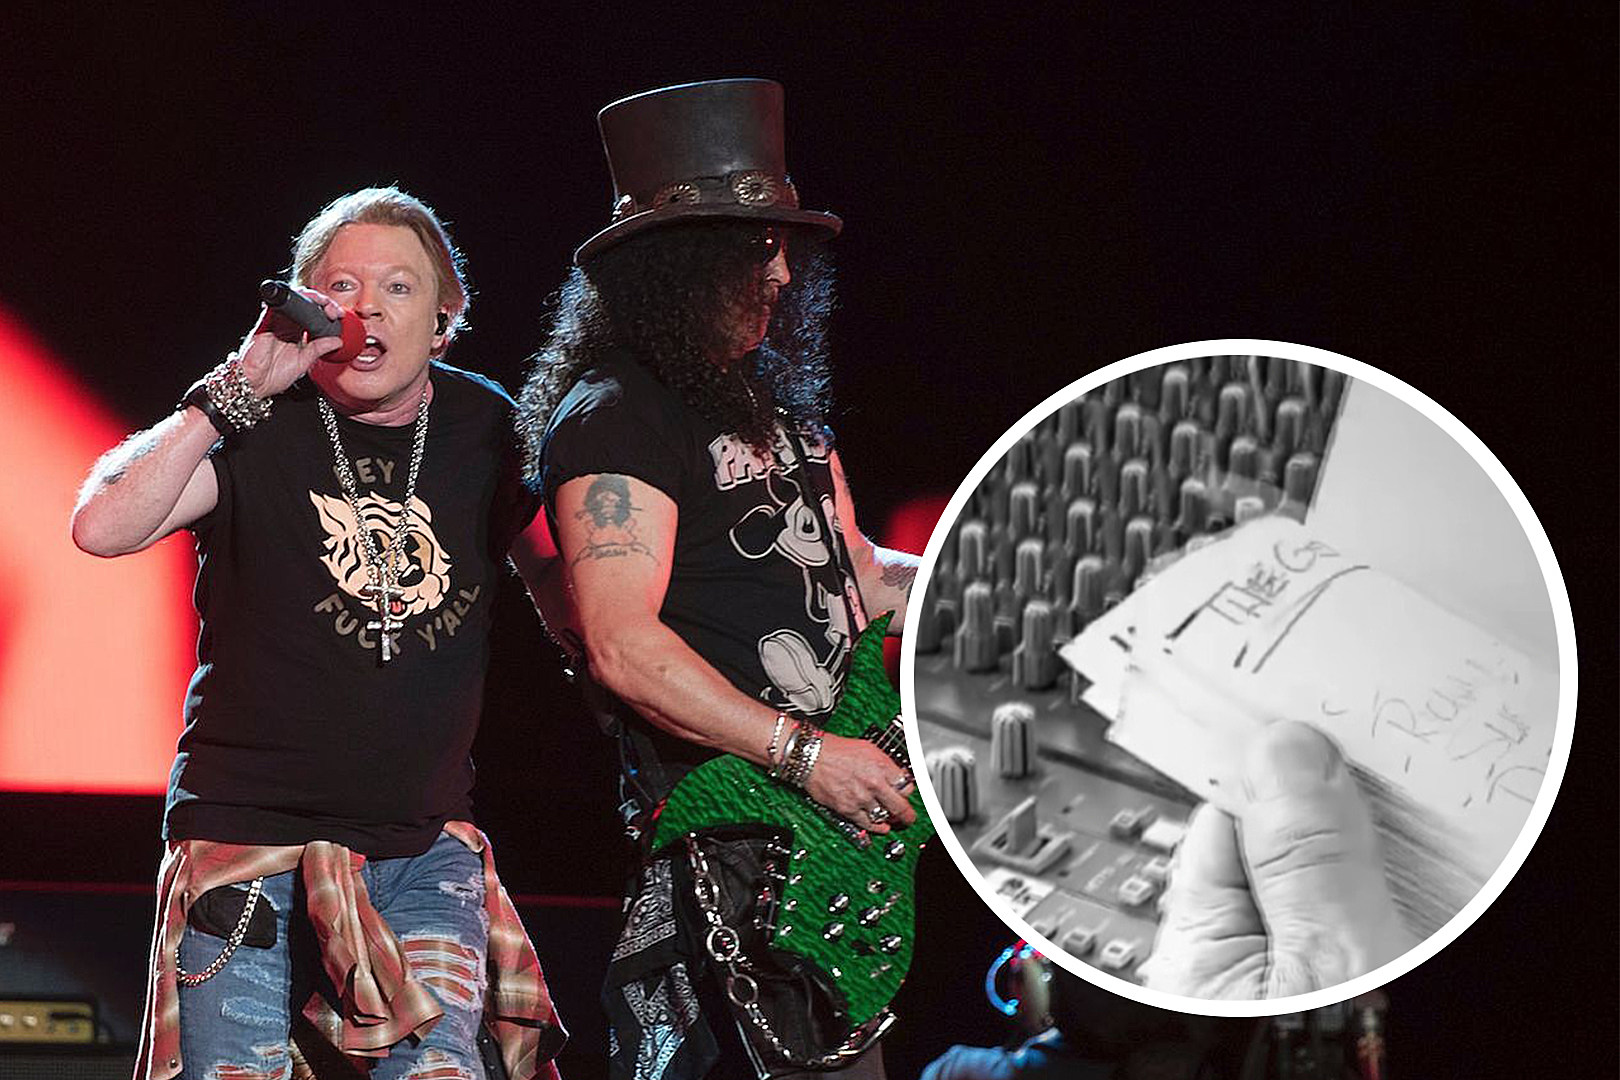 Did Guns N Roses Tease Possible New Song Titles on Social Media?